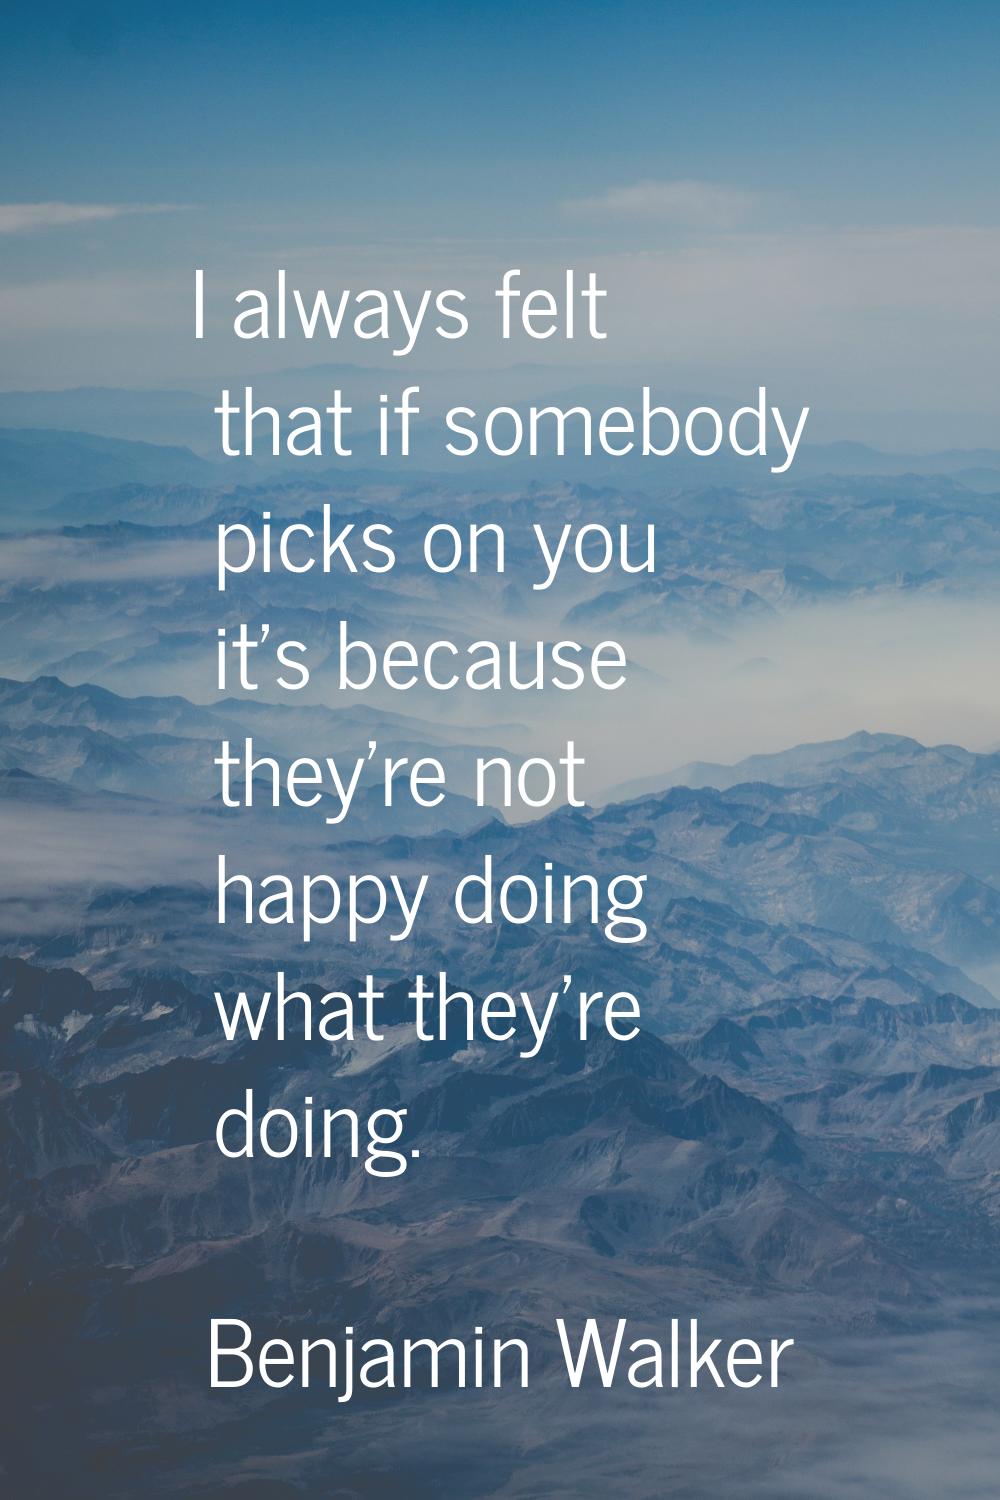 I always felt that if somebody picks on you it's because they're not happy doing what they're doing